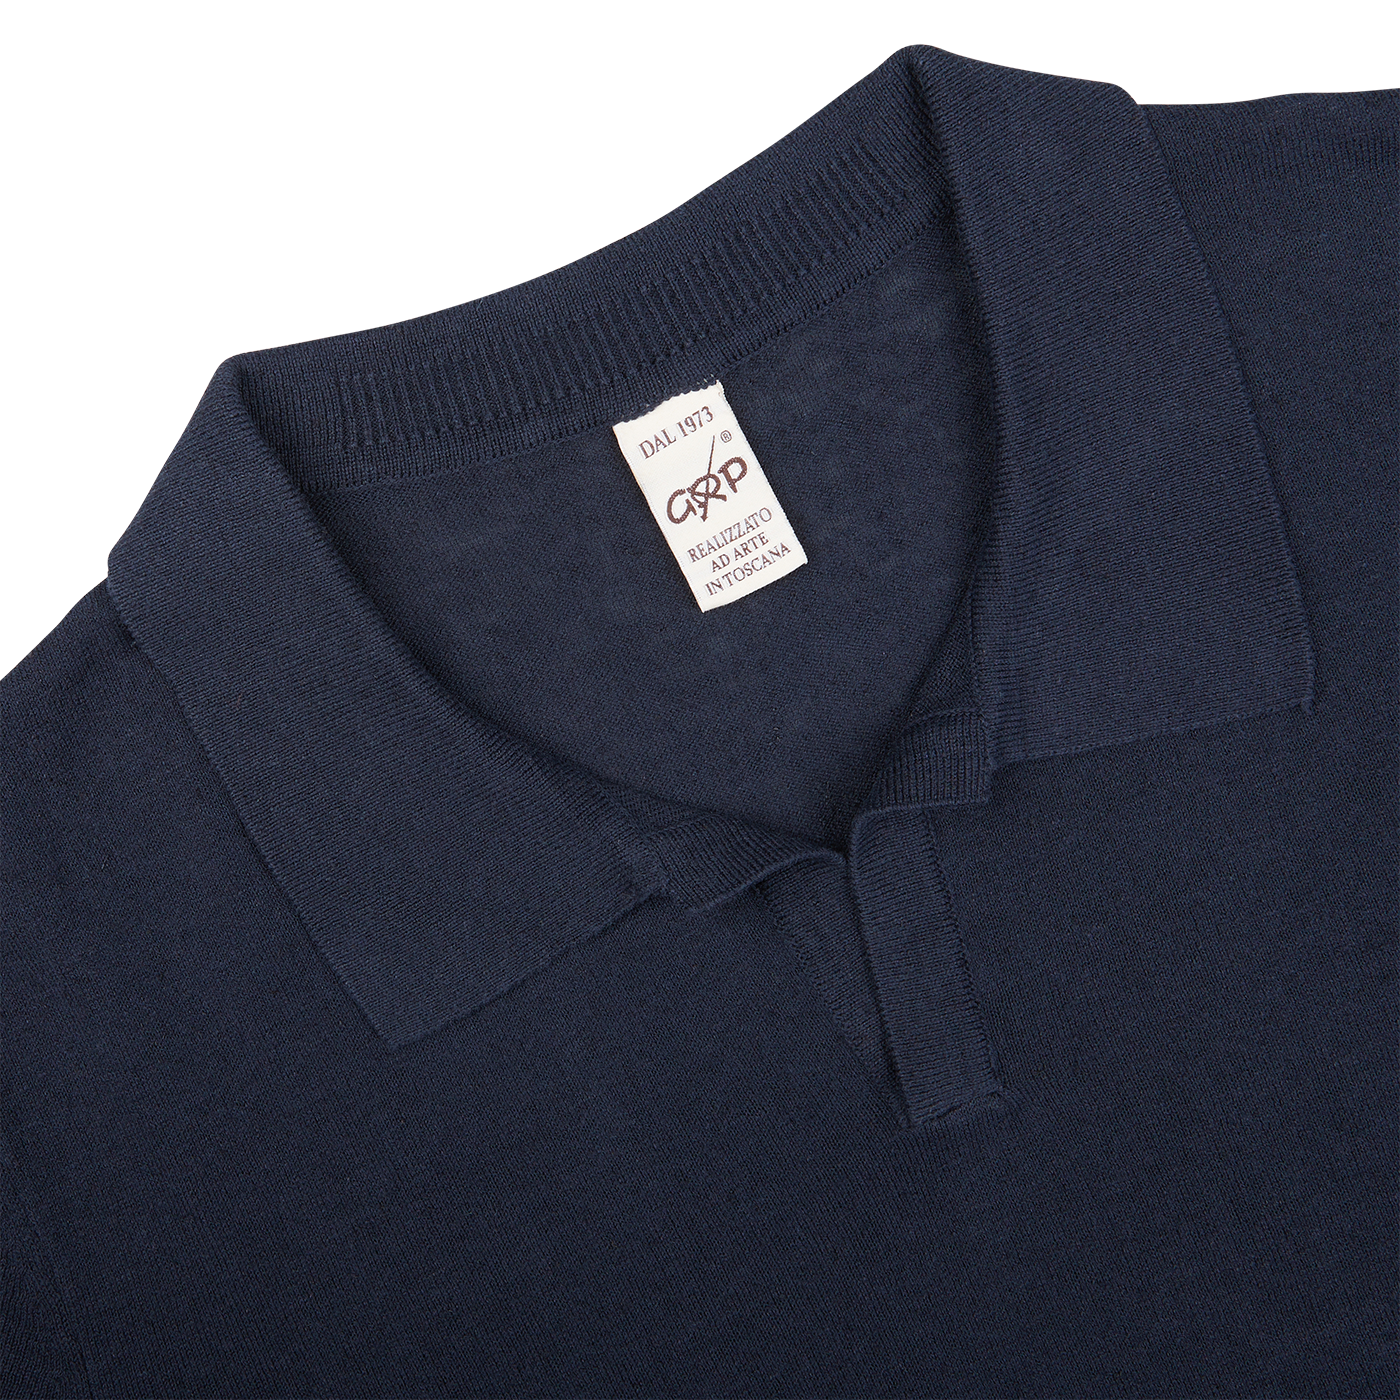 A slim fit Dark Blue Cotton Linen Polo Shirt with a collar from G.R.P.